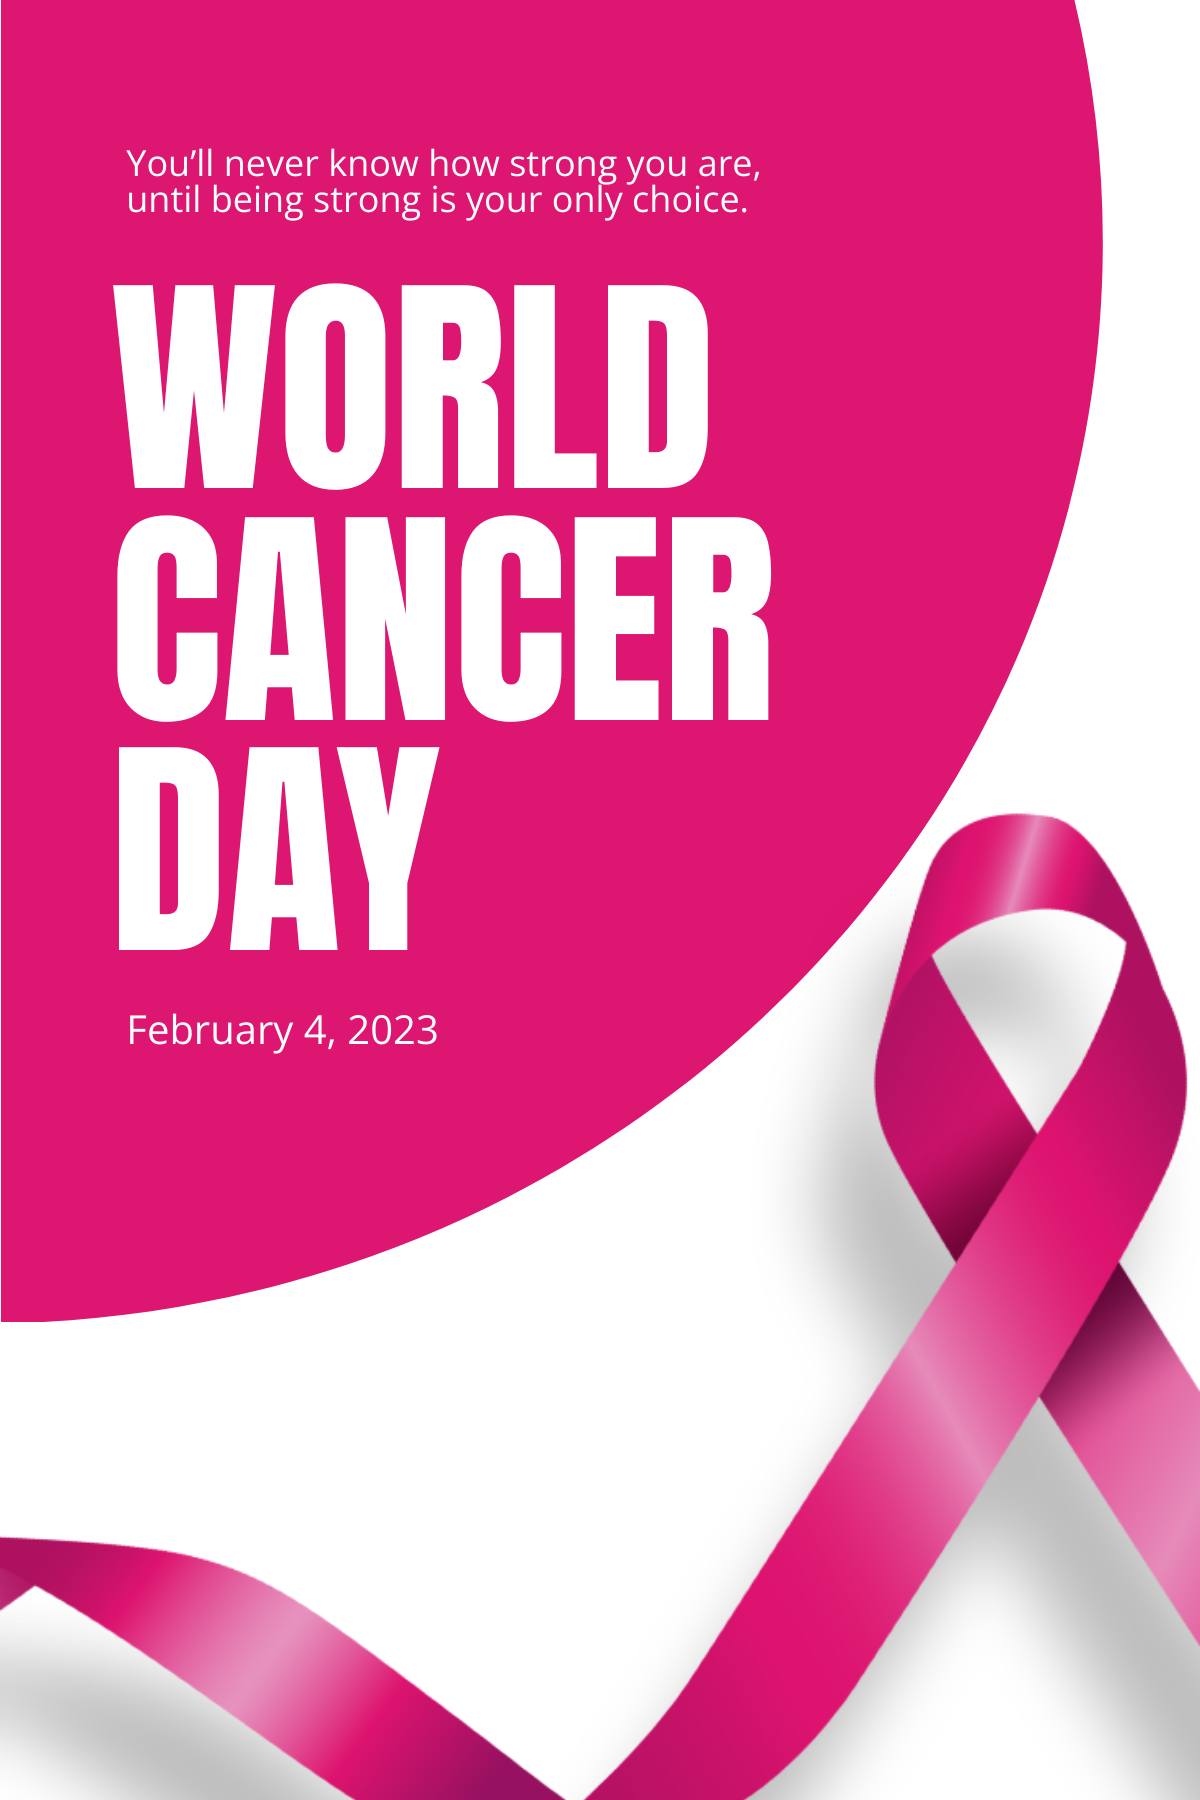 World Cancer Day Pinterest Pin Template